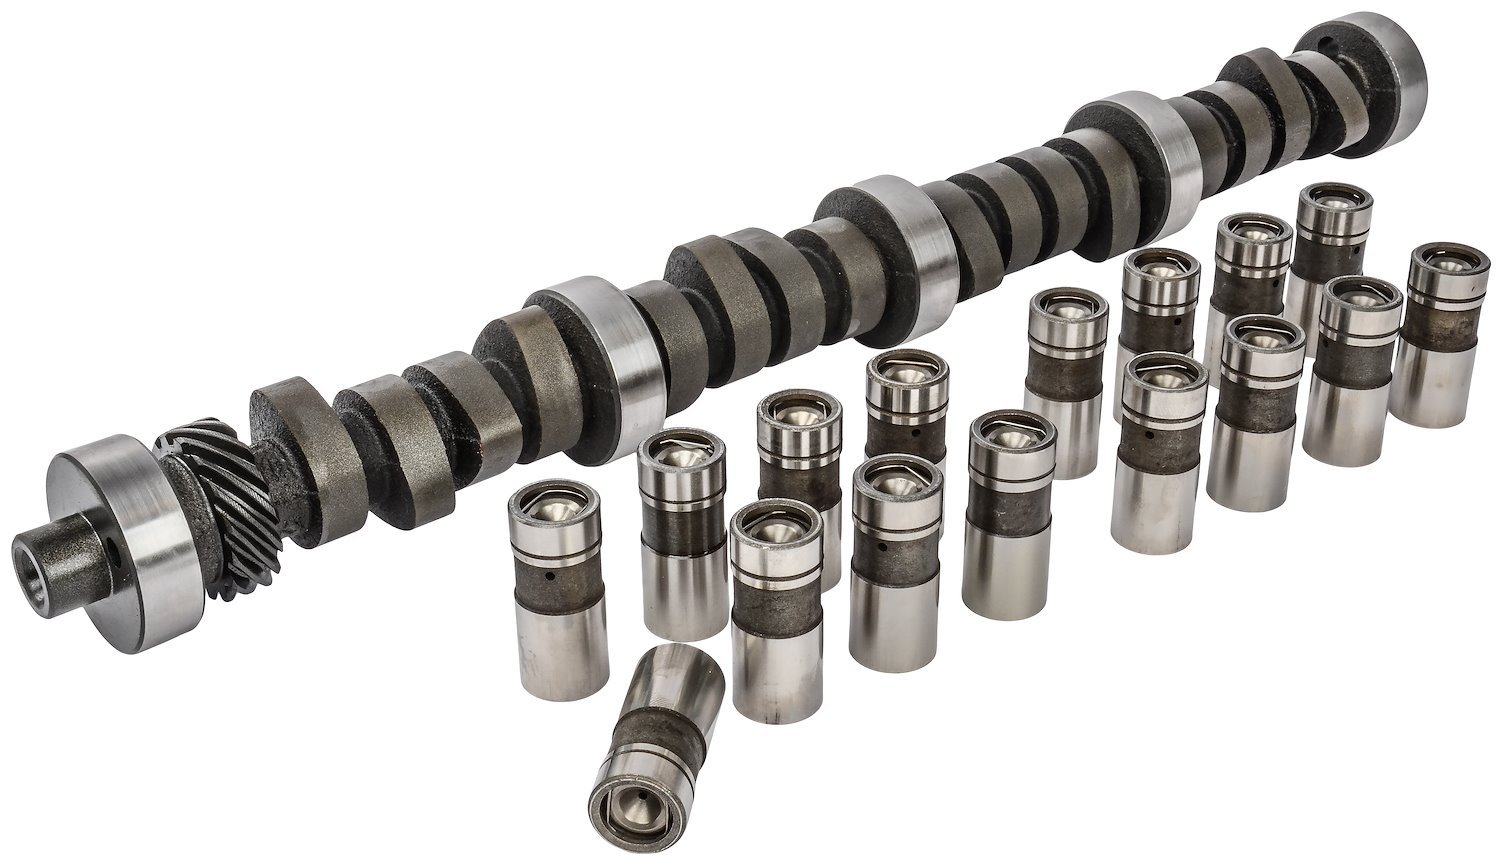 JEGS 200161: Hydraulic Flat Tappet Camshaft & Lifters for Chrysler ...